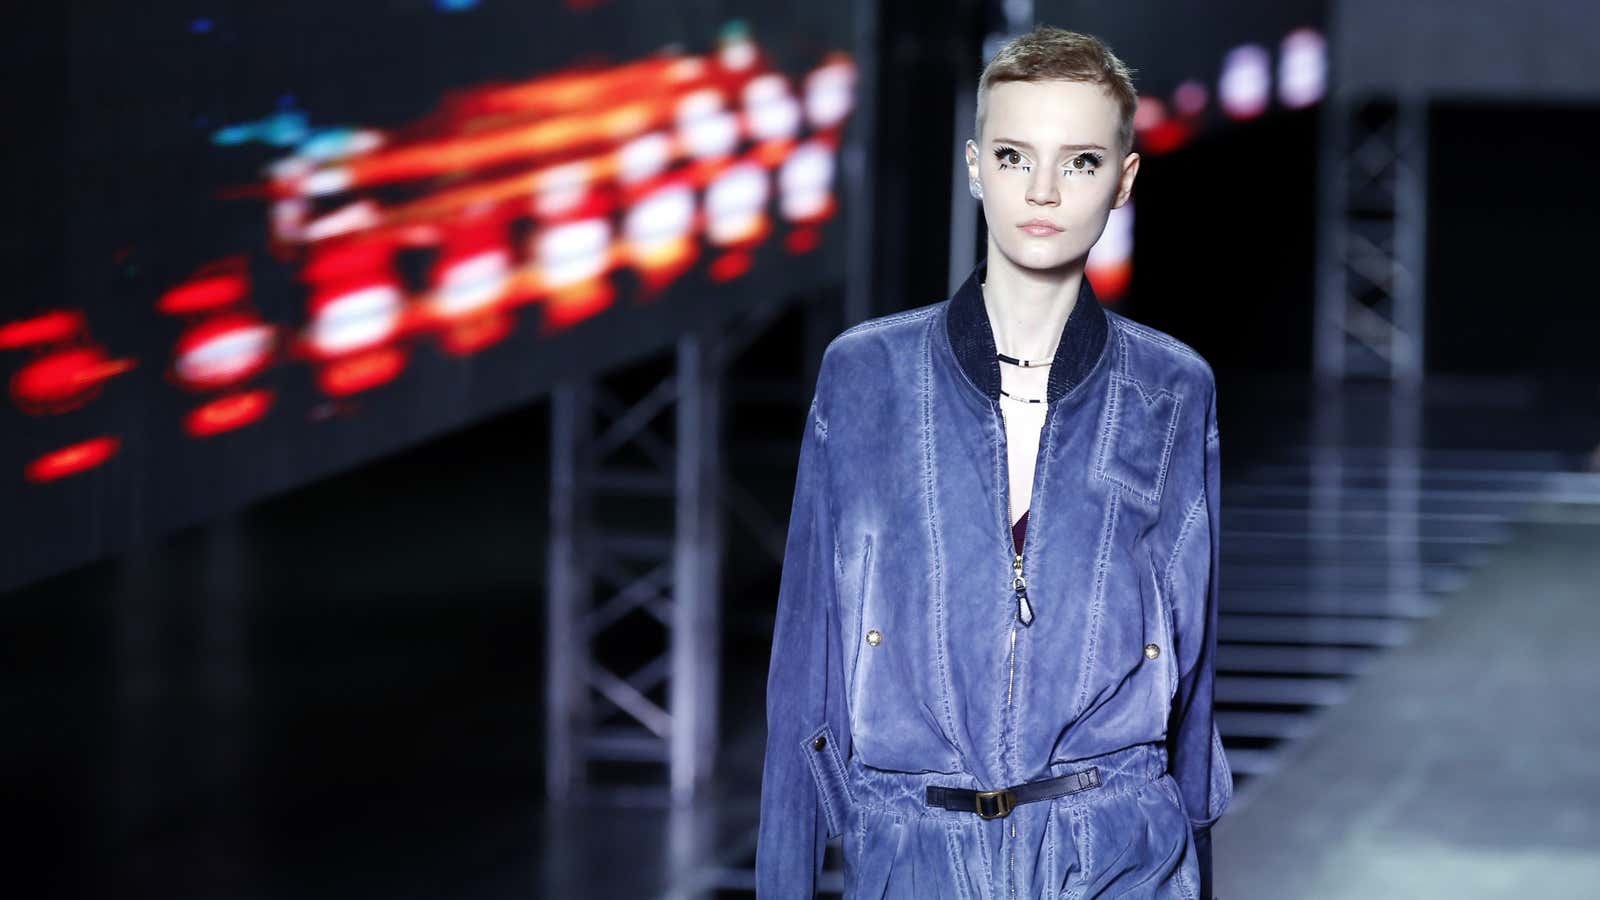 Bonus points for this jumpsuit-bomber hybrid from the Louis Vuitton spring 2016 runway.